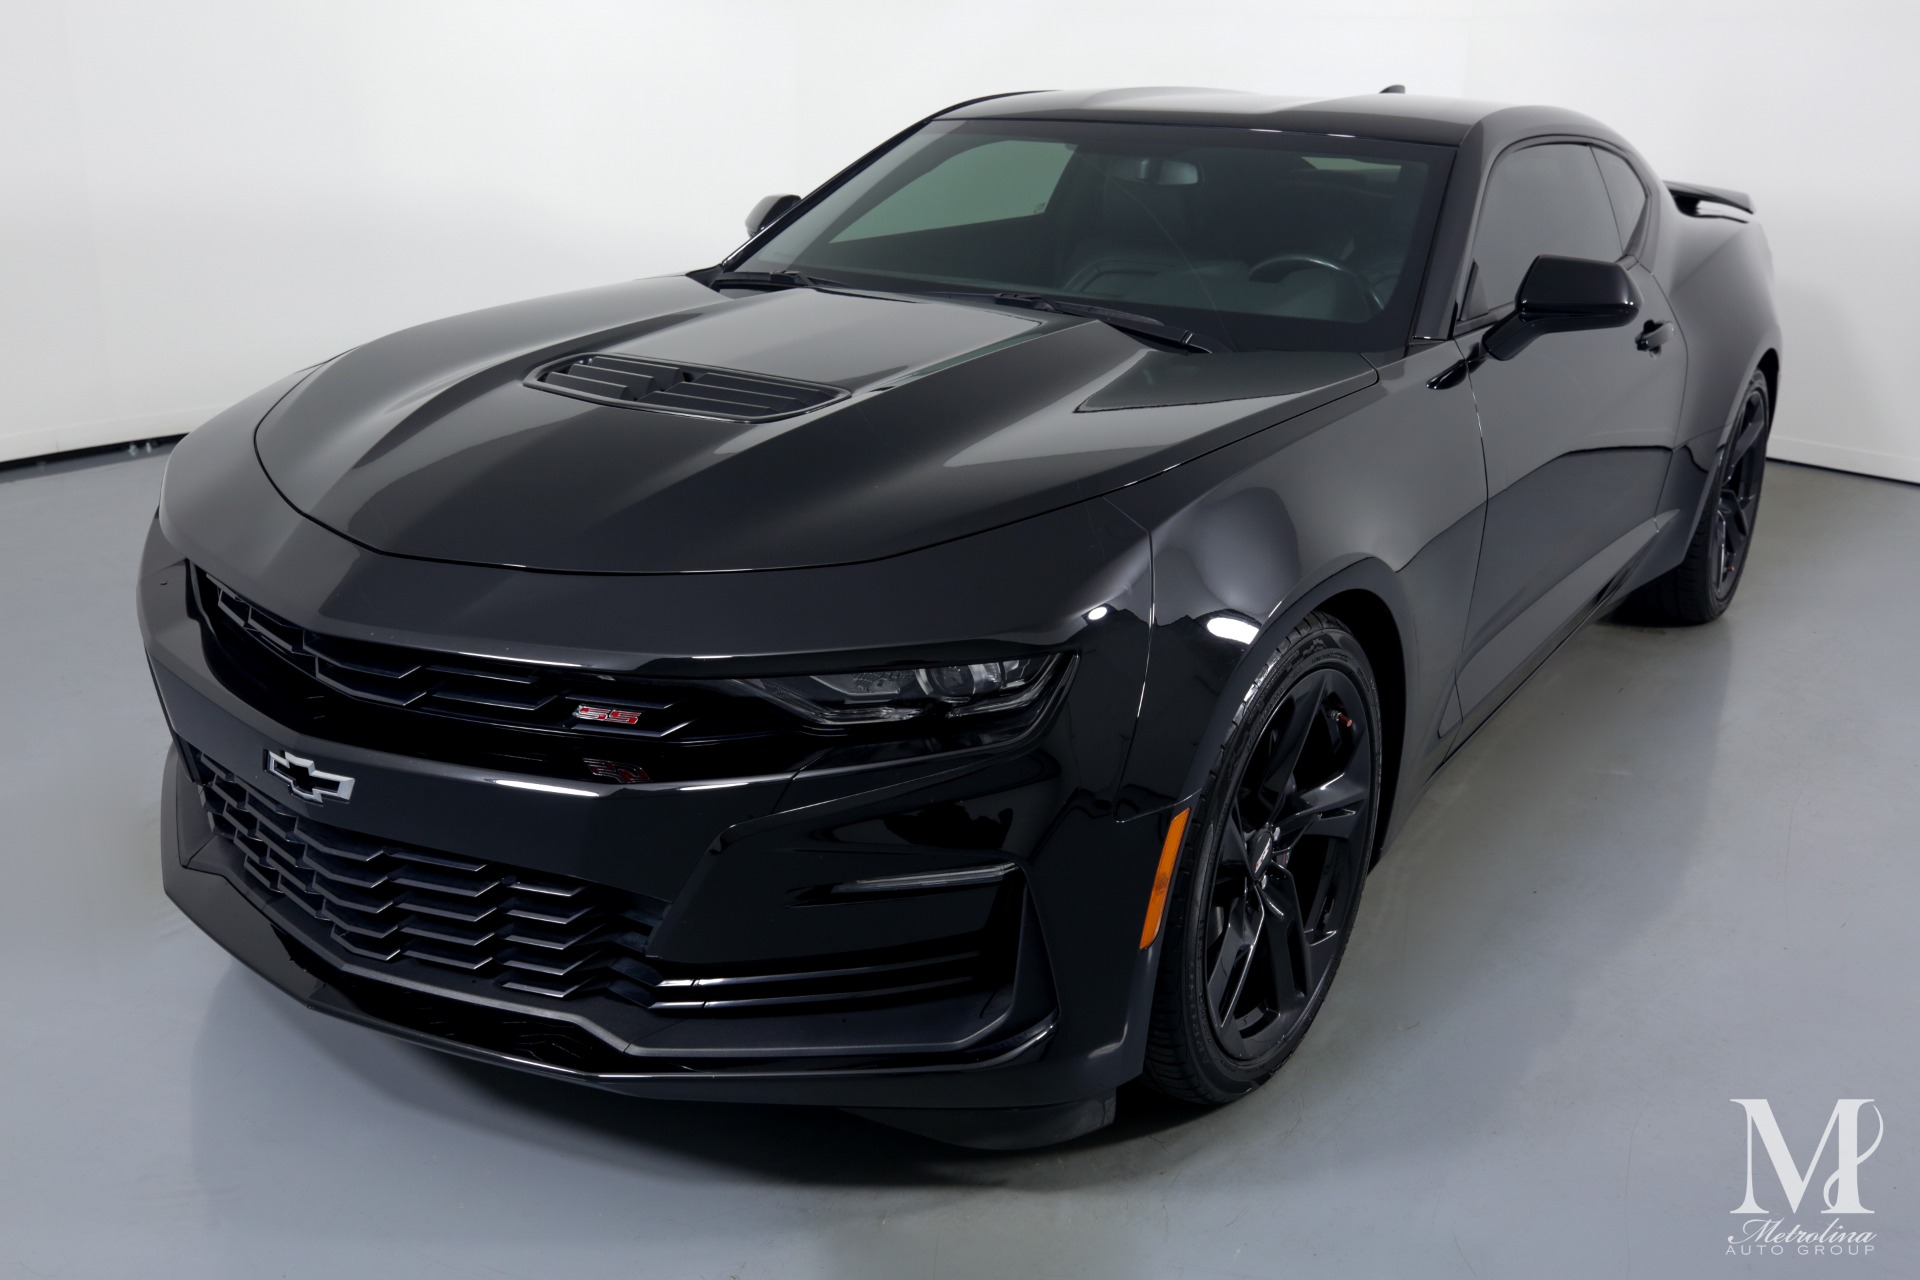 Used 2019 Chevrolet Camaro SS for sale $48,996 at Metrolina Auto Group in Charlotte NC 28217 - 4